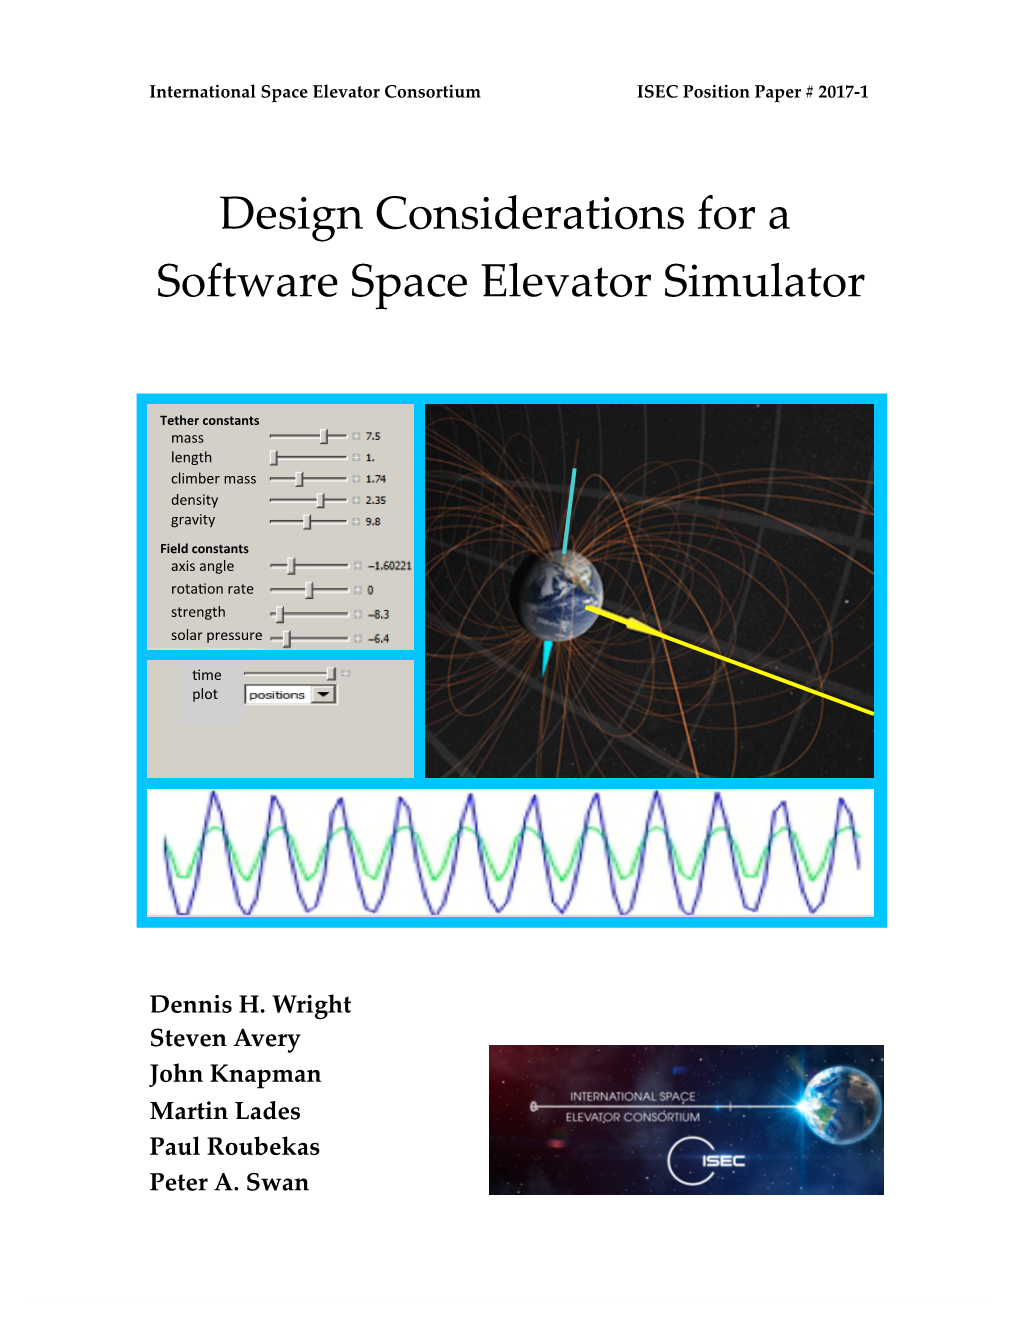 Design Considerations for a Software Space Elevator Simulator